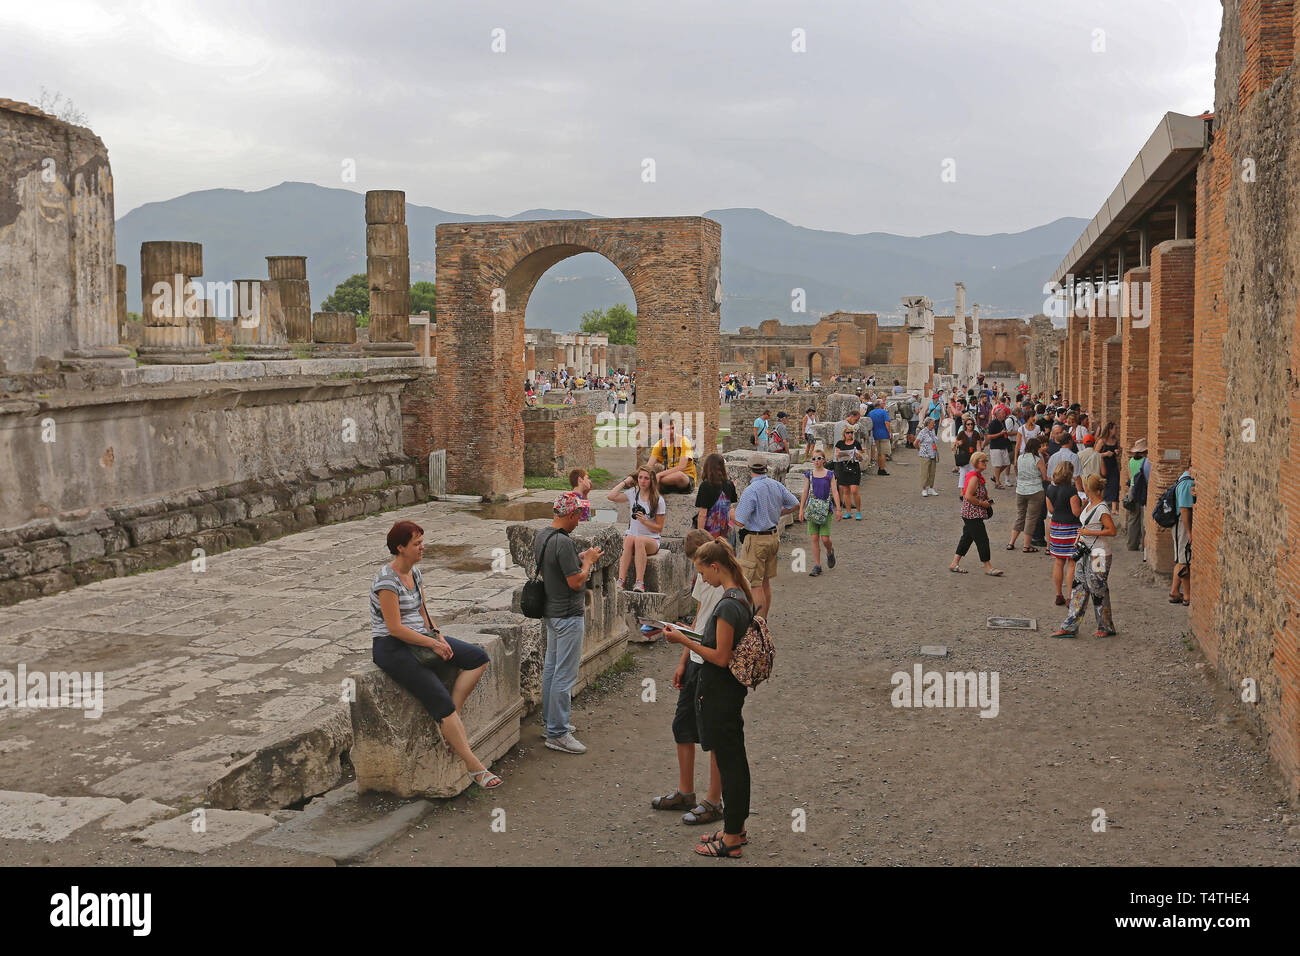 Pompei, Italy - June 25, 2014: Bunch of Tourists at Ancient Roman Temple Ruins World Heritage Site Near Naples, Italy. Stock Photo